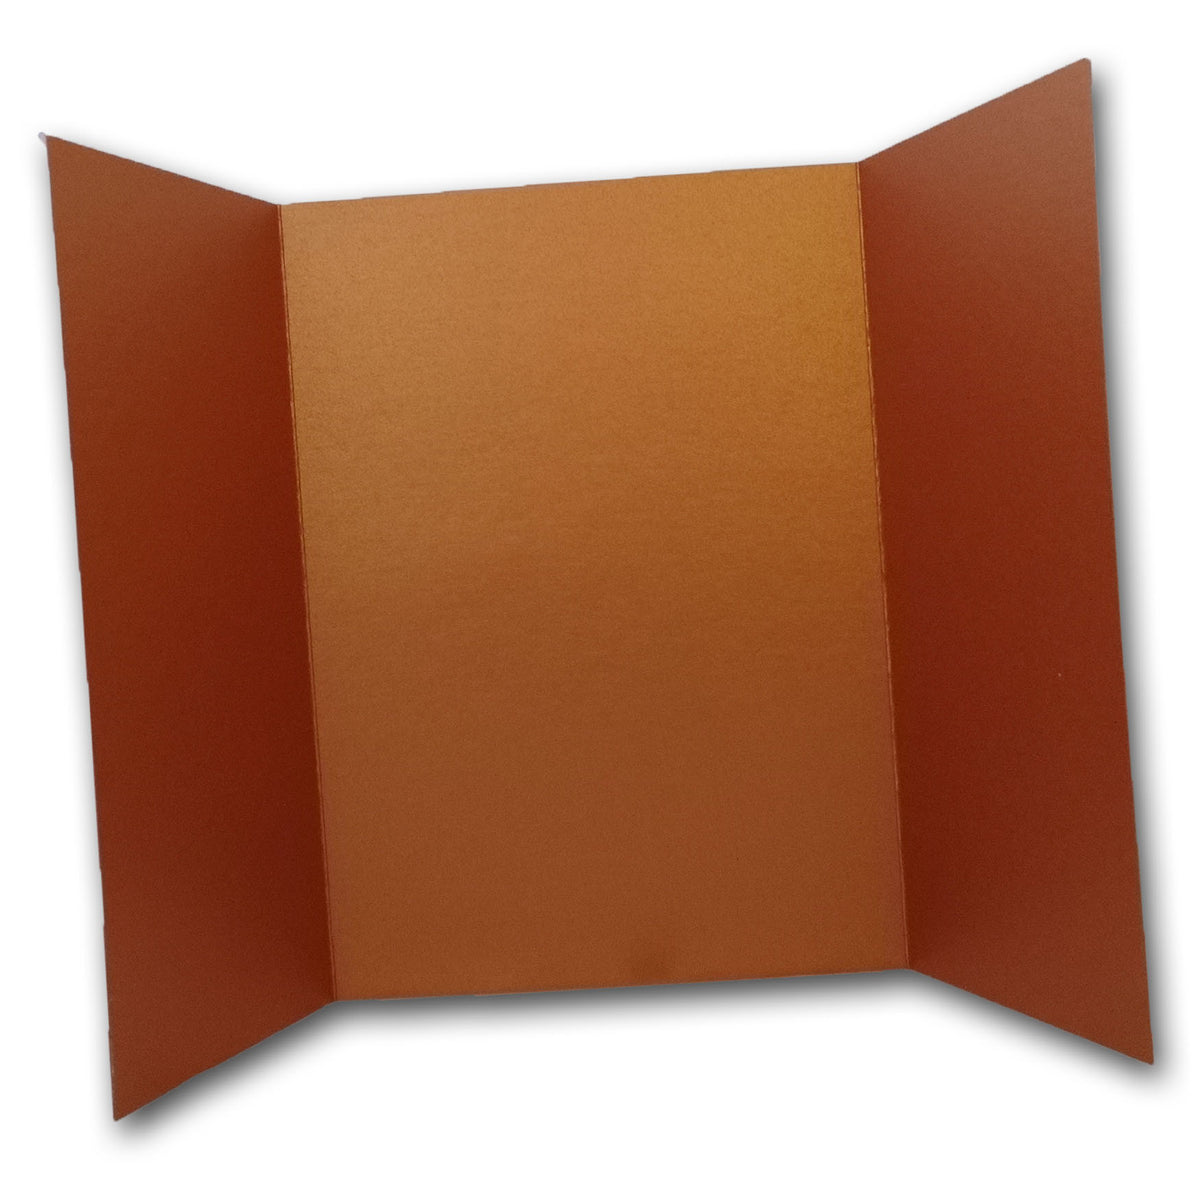 Shimmery Copper 5x7 Gatefold Discount Card Stock DIY Invitations